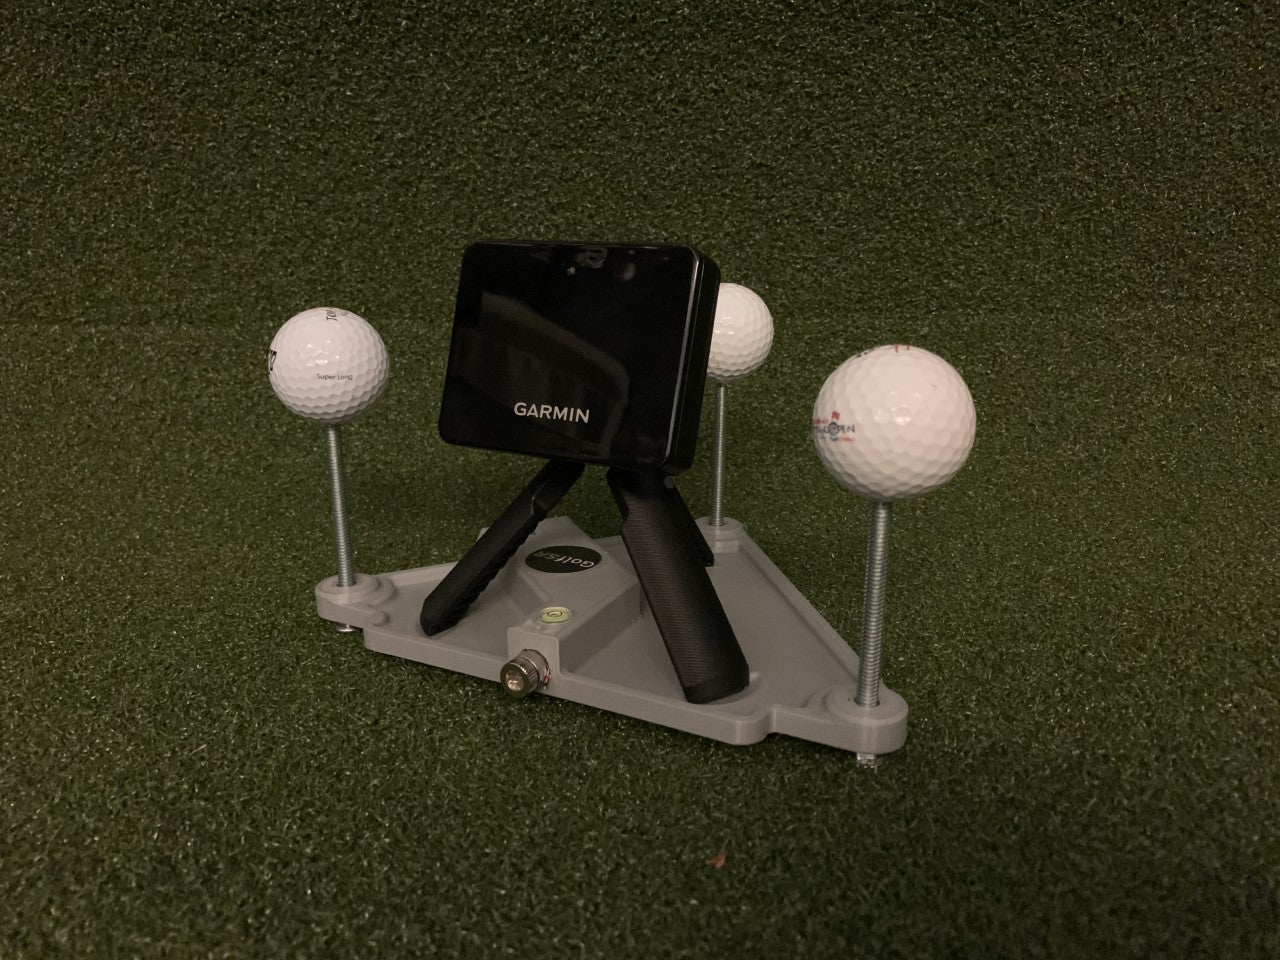 Adjustable R10 stand (with golf balls)